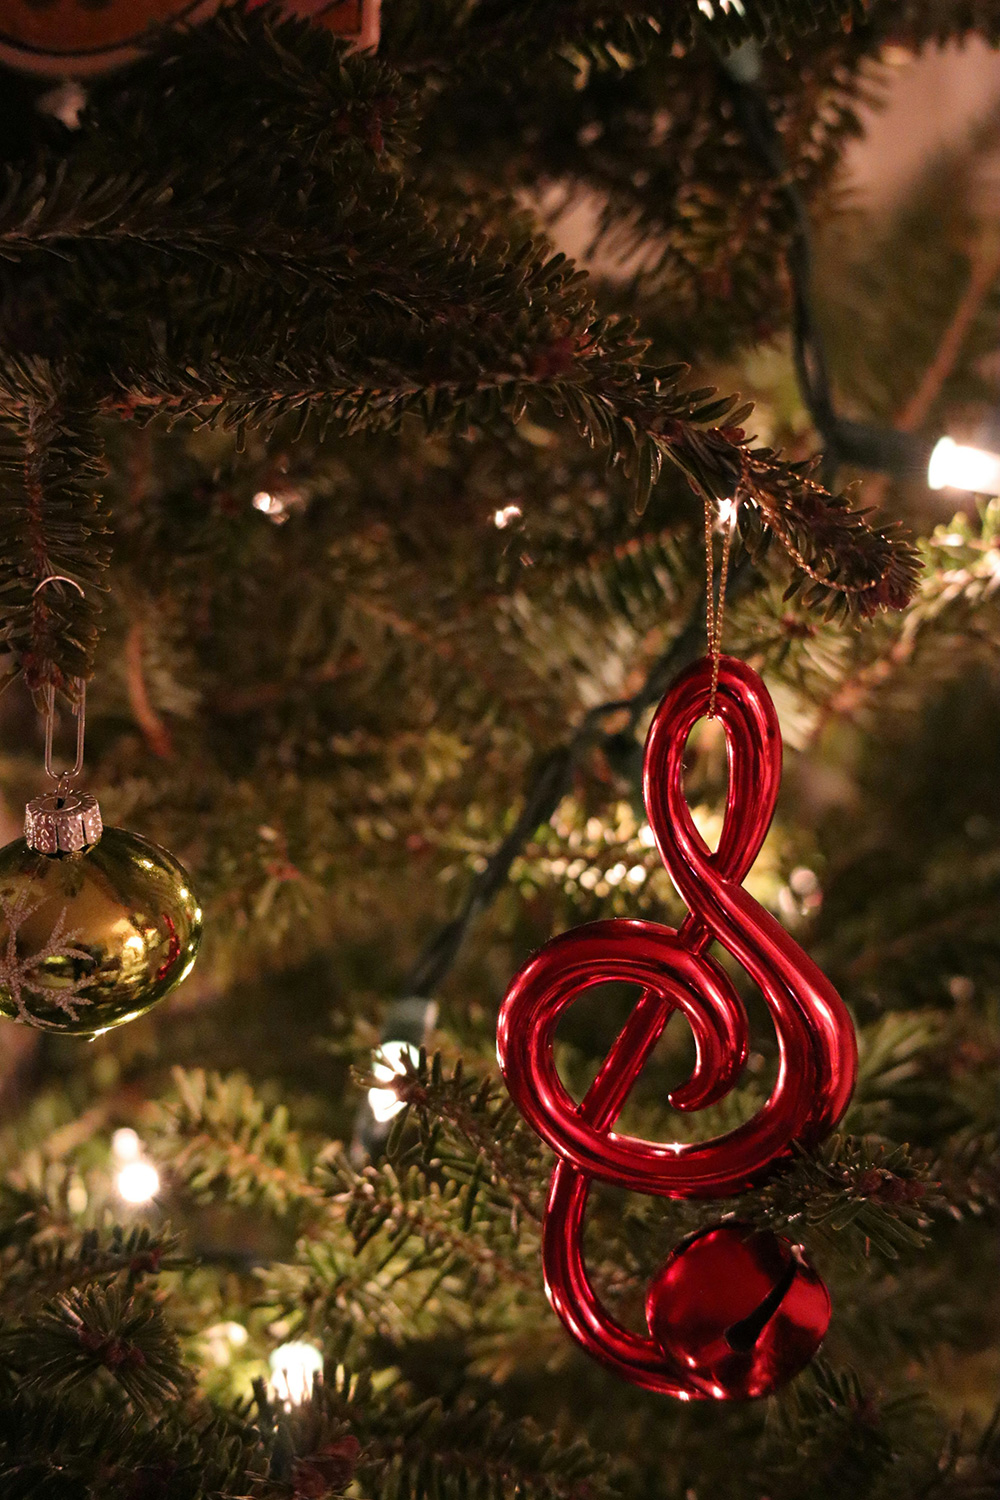 Close-up of a Christmas tree decorated with twinkling lights, a shiny green bauble, and a red treble clef ornament. The background is filled with pine needles and the warm glow of the festive lights.